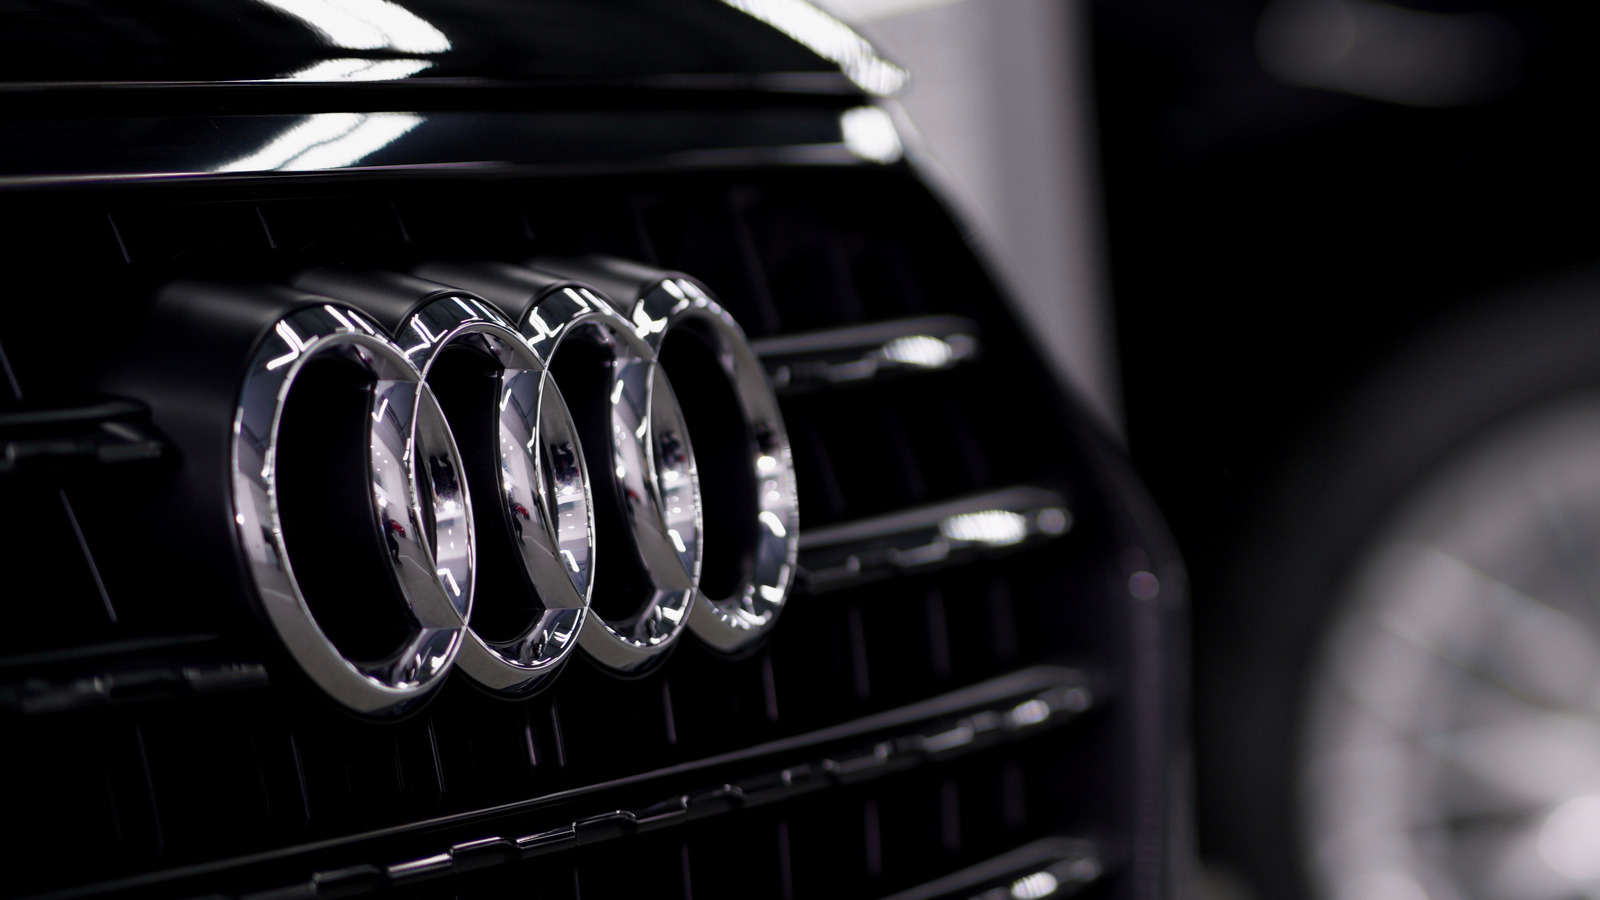 The history of “Audi”: how it helped to develop the logo we have today